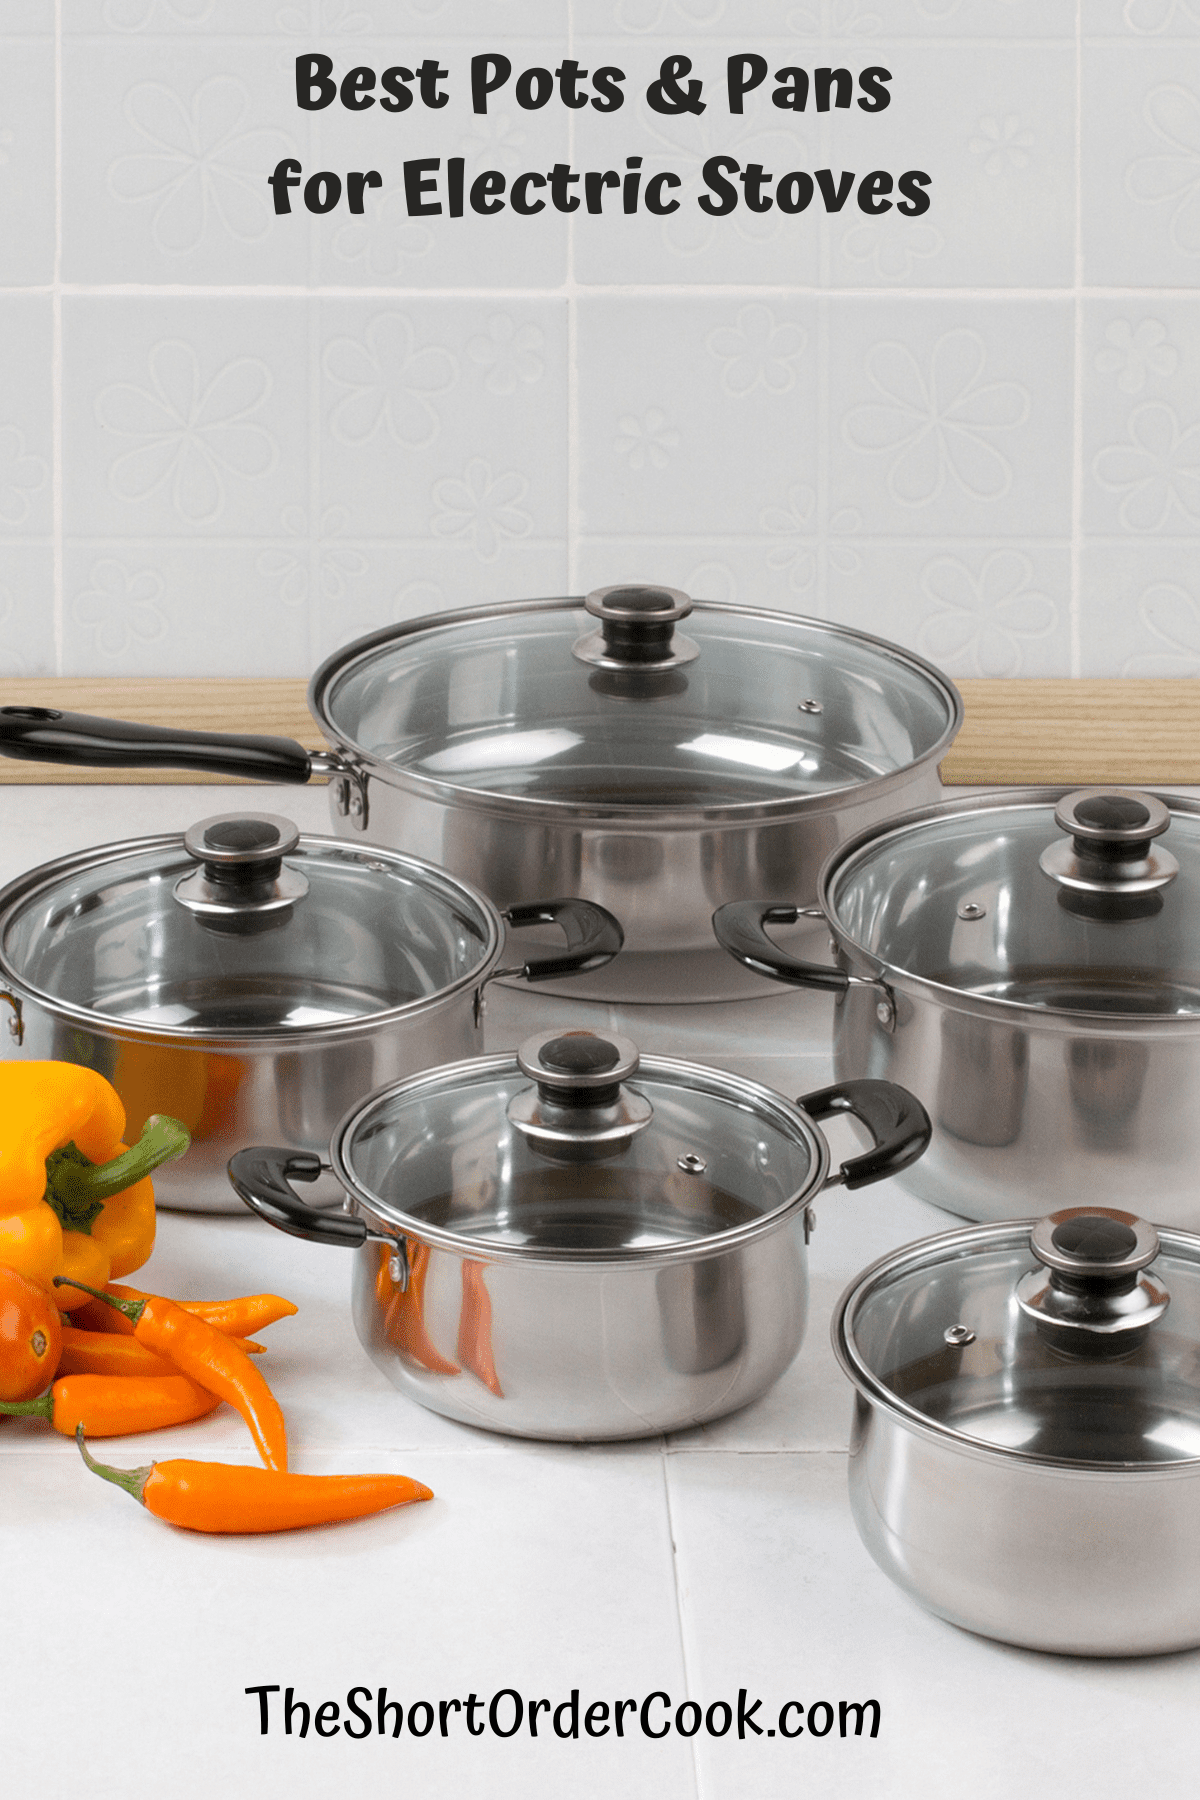 Best pots and pans for electric range.